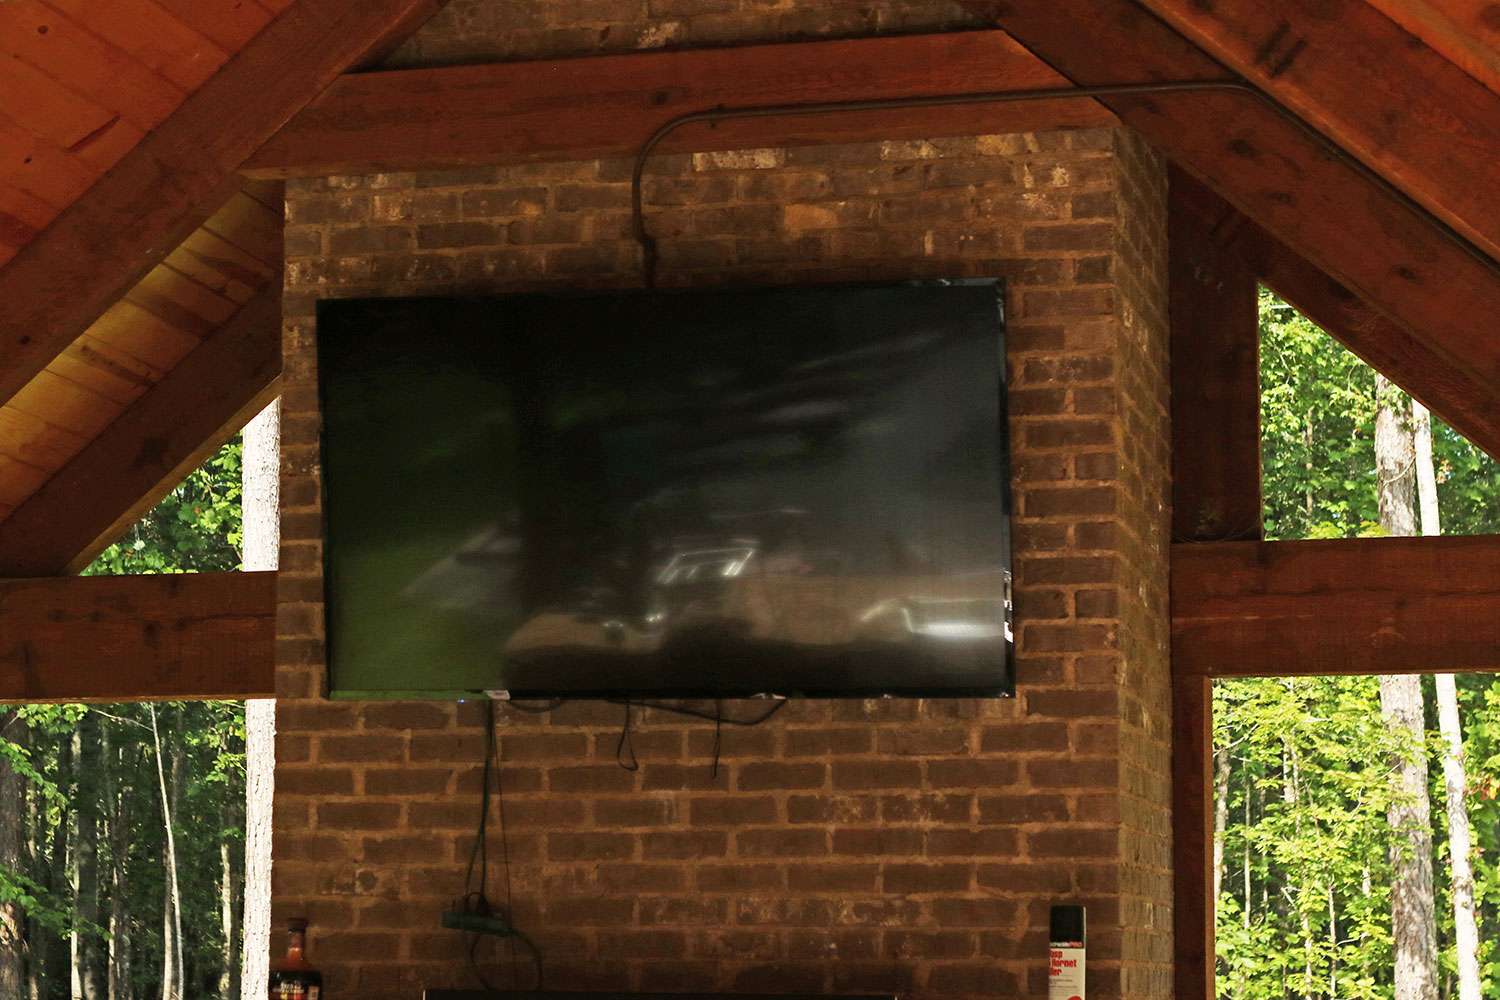 Of course there's a TV mounted above the outdoor fireplace in case Alabama football is taking place. 